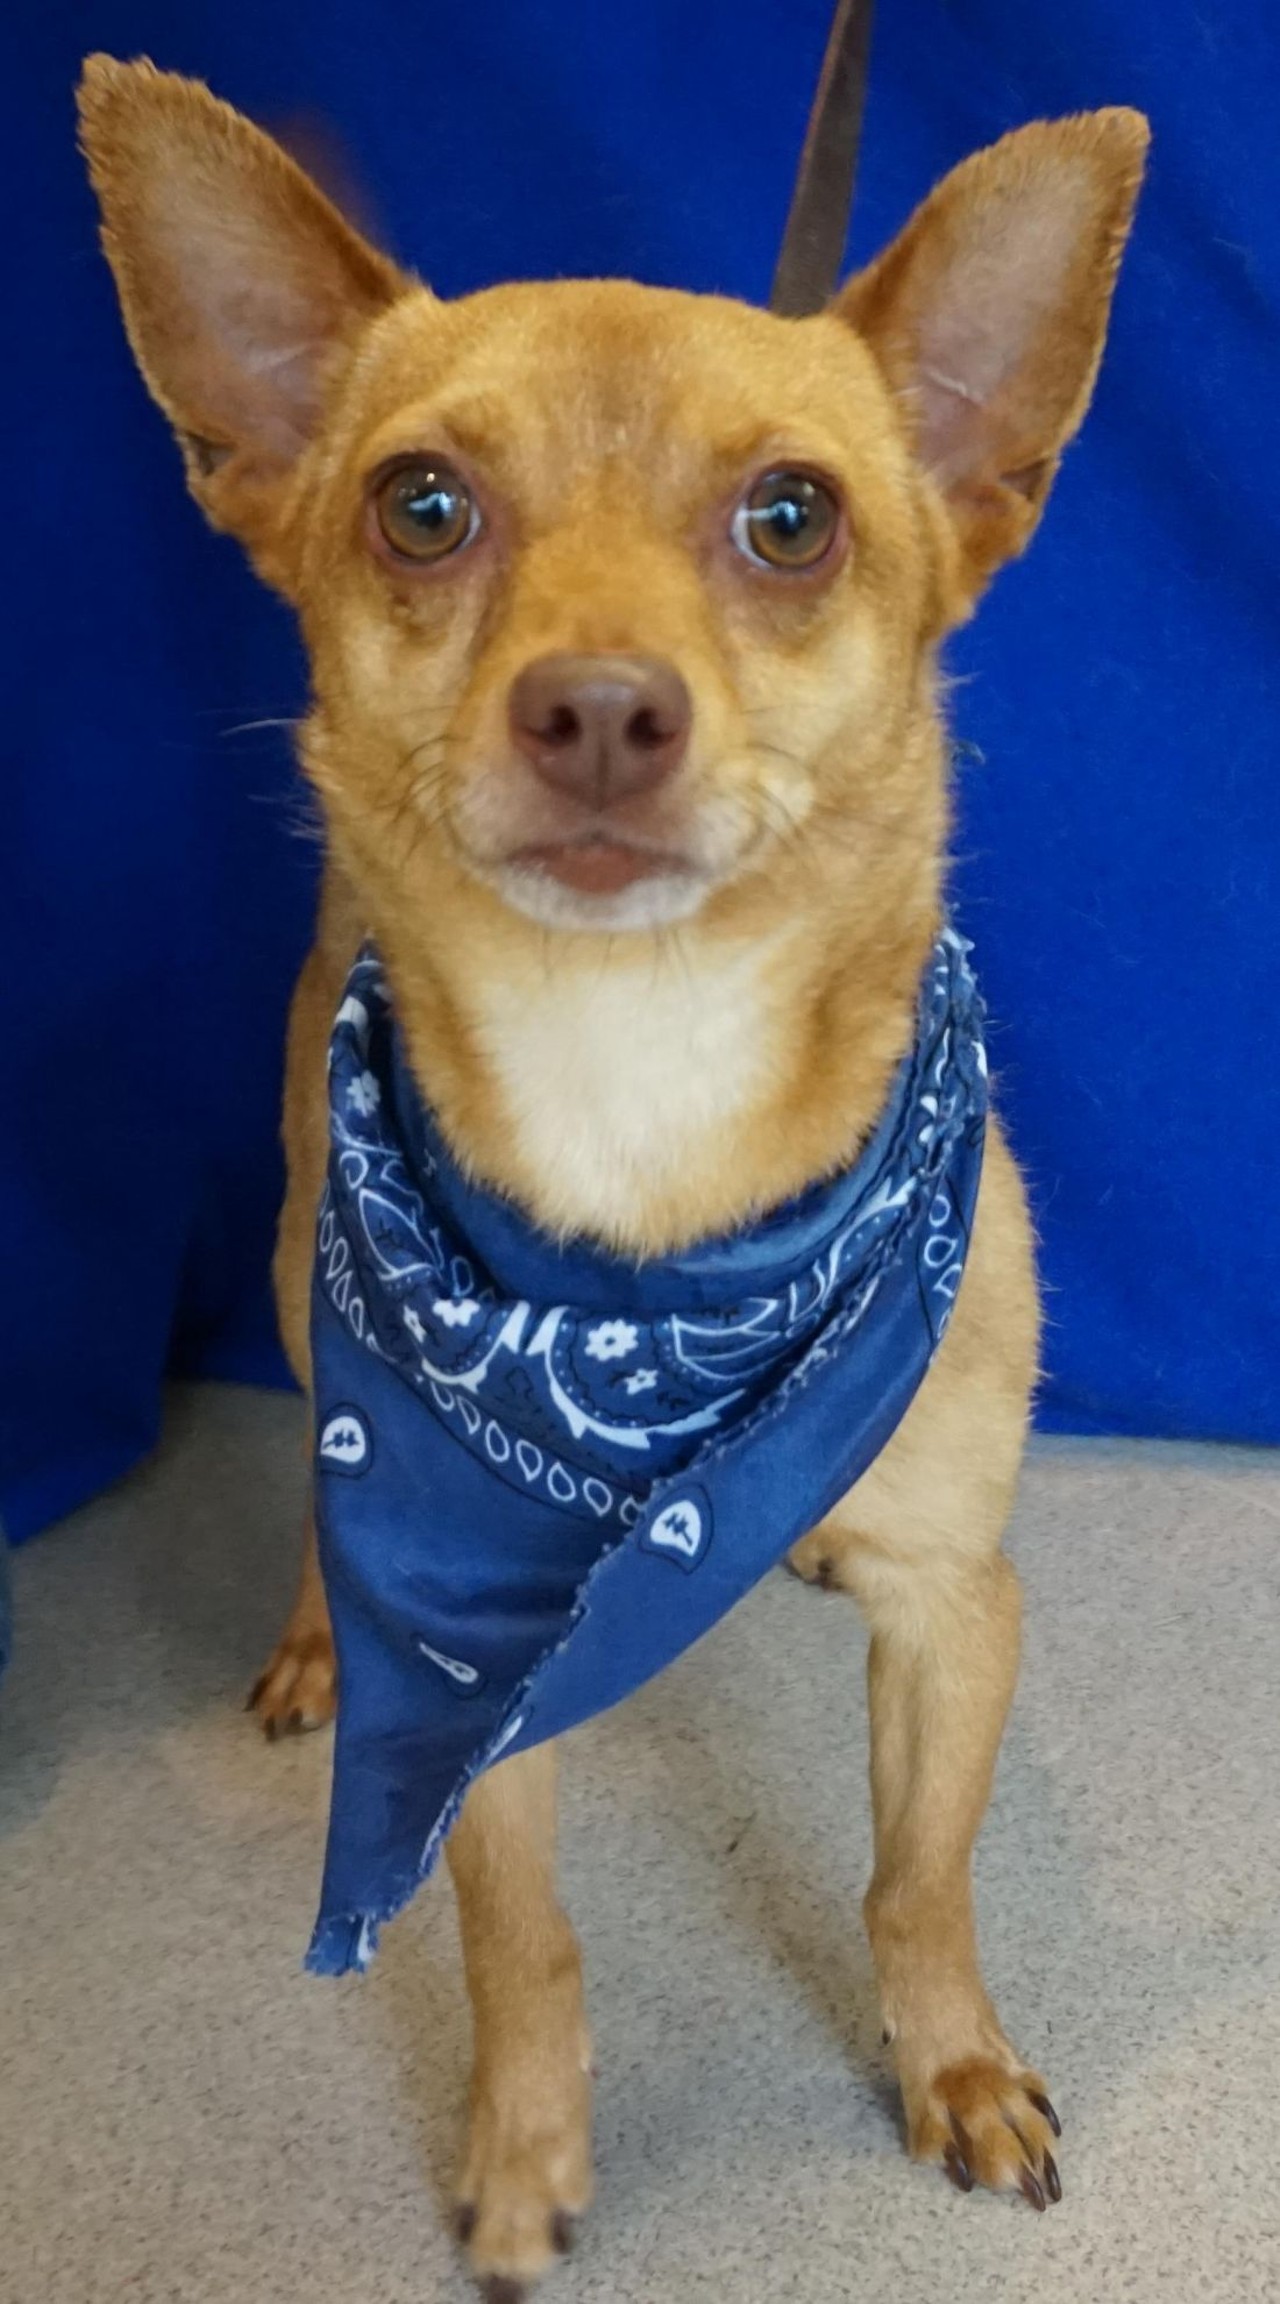 NAME: Alistar 
GENDER: Male
BREED: Chihuahua 
AGE: 5 years 
WEIGHT: 10 pounds
SPECIAL CONSIDERATIONS: Alistar may prefer to be your only dog. 
REASON I CAME TO MHS: Agency transfer 
LOCATION: Rochester Hills Center for Animal Care 
ID NUMBER: 870695 